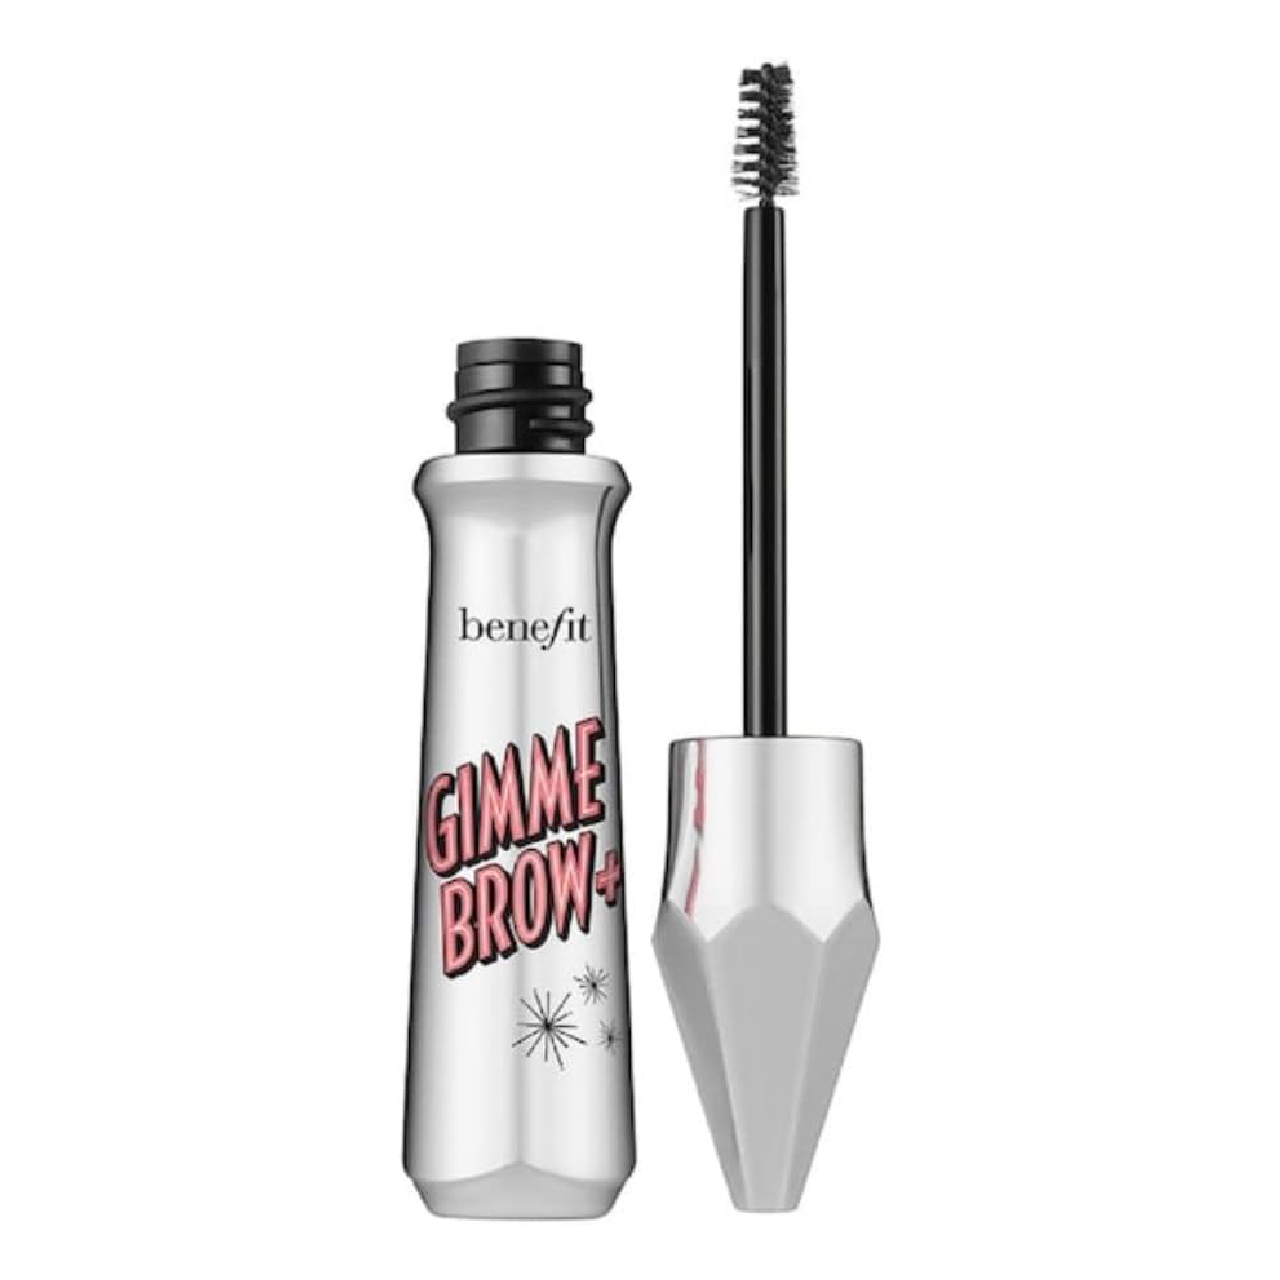 Benefit Gimme Brow+ volumizing eyebrow gel tube on a white background